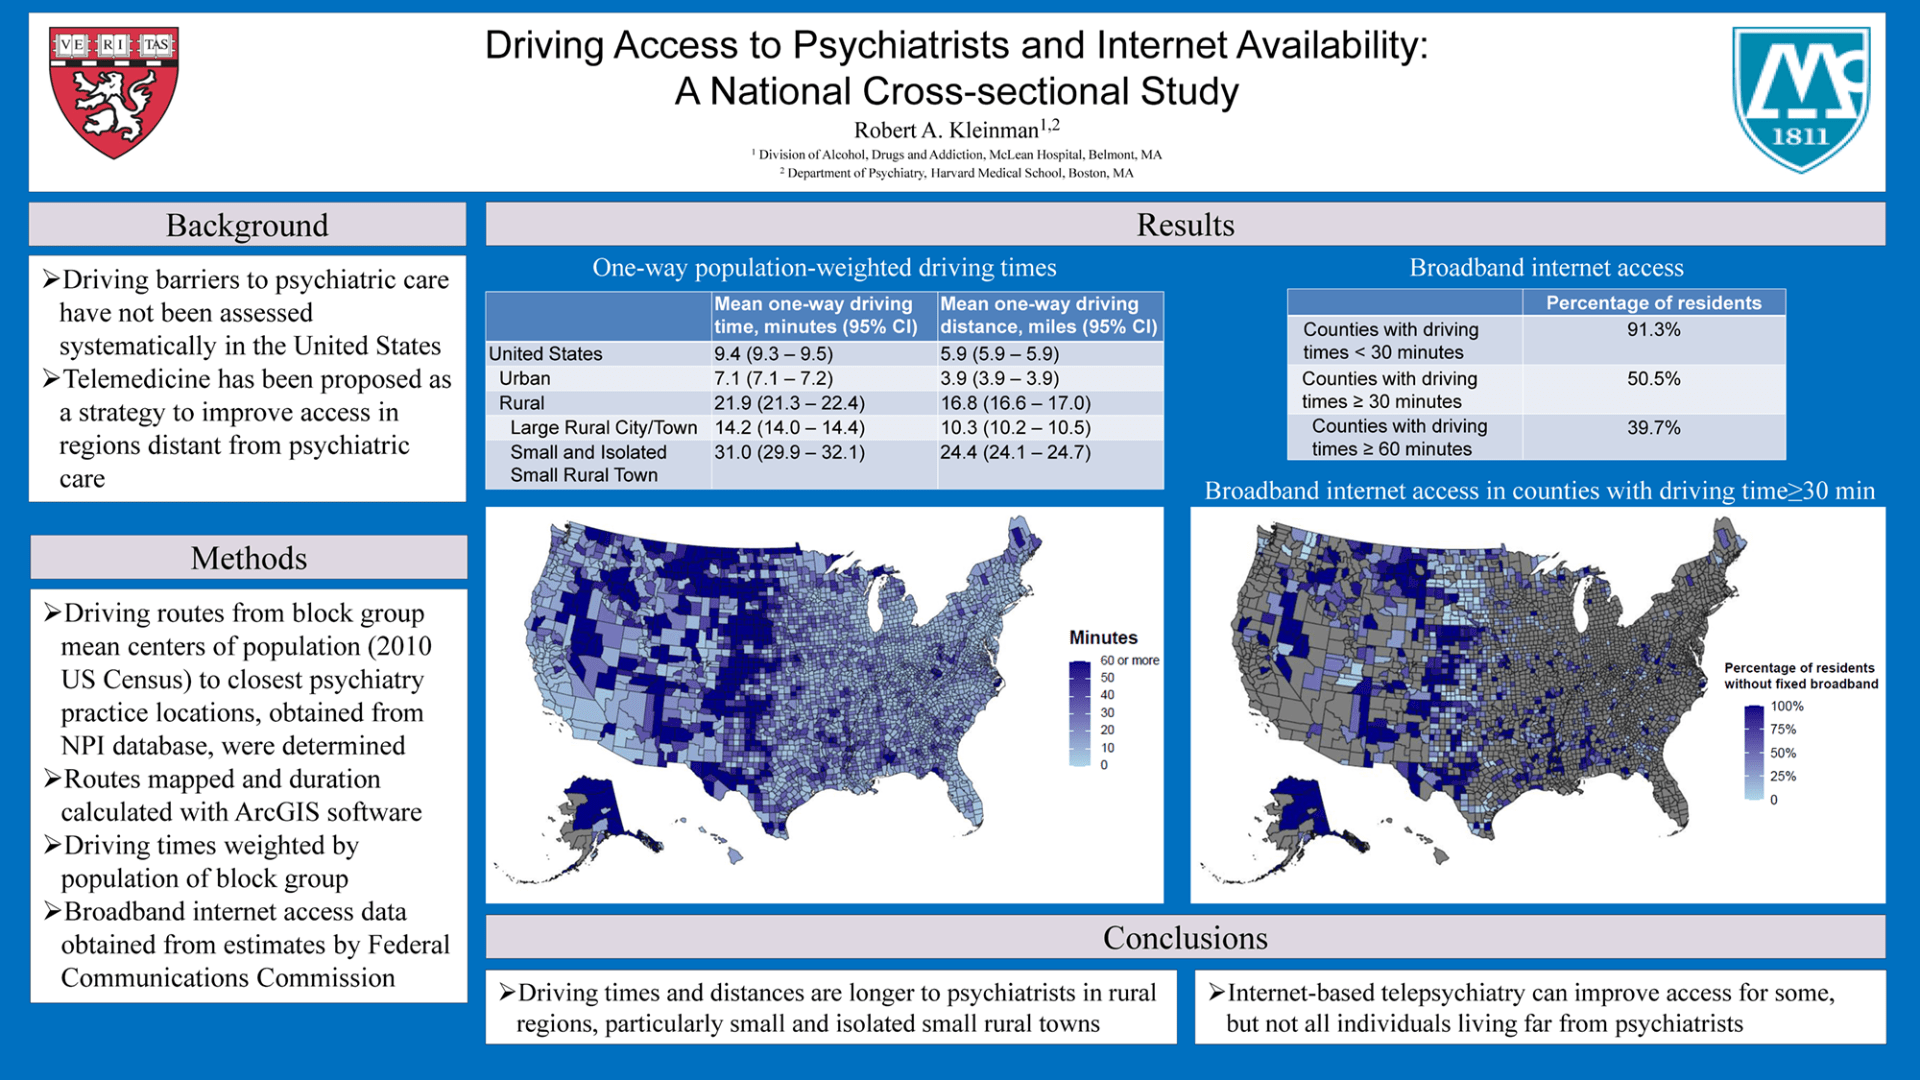 Driving Access to Psychiatrists and Internet Availability: A National Cross-sectional Study